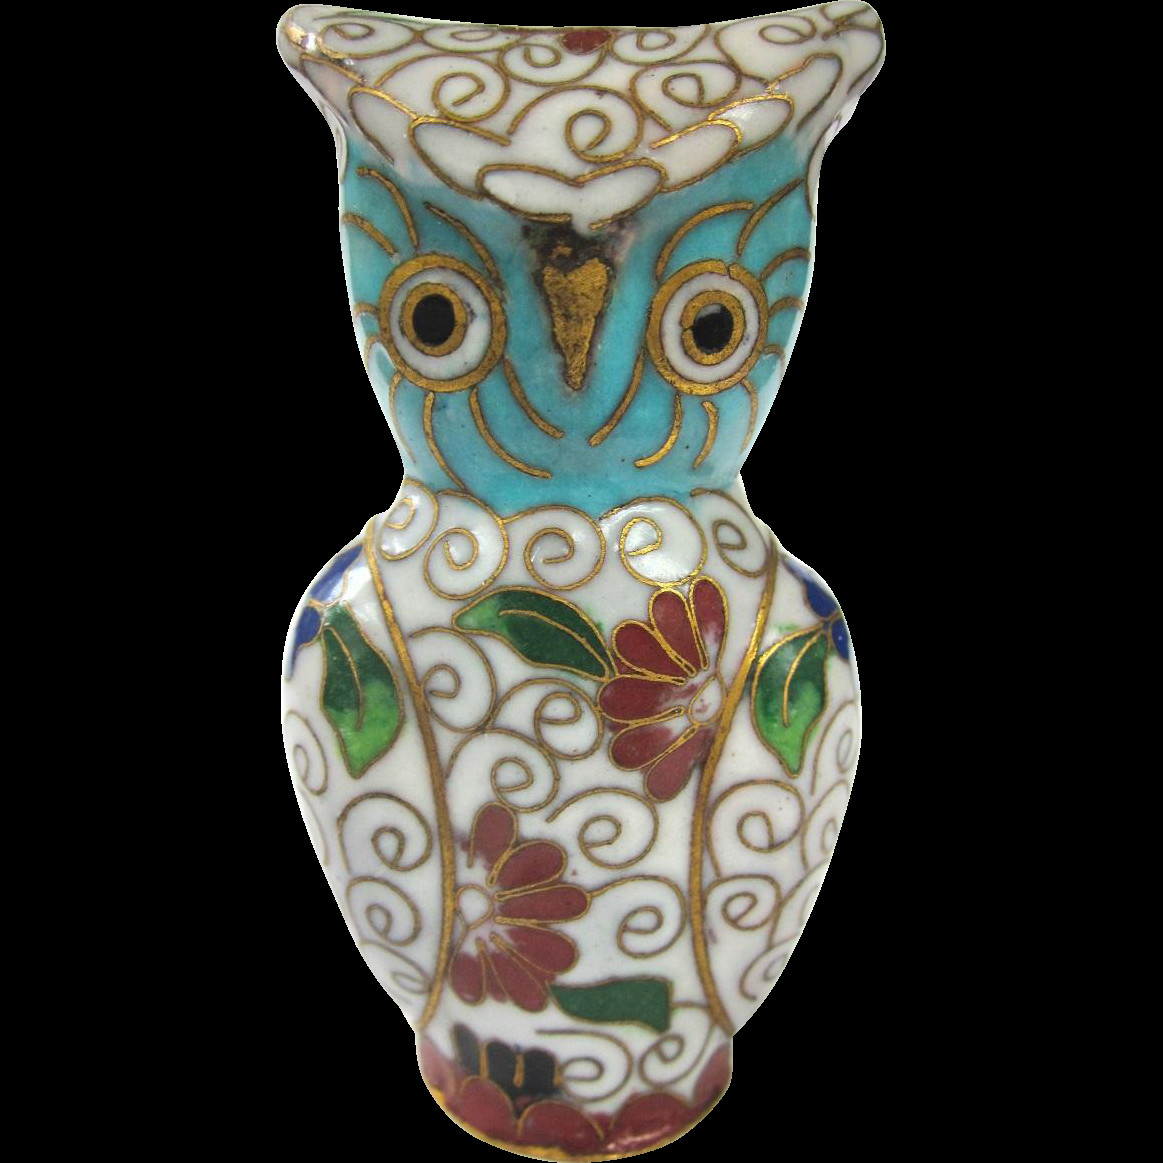 22 Lovable Old oriental Vases 2024 free download old oriental vases of beswick barn owl porcelain figurine in a rare old chinese cloisonna owl animal figure